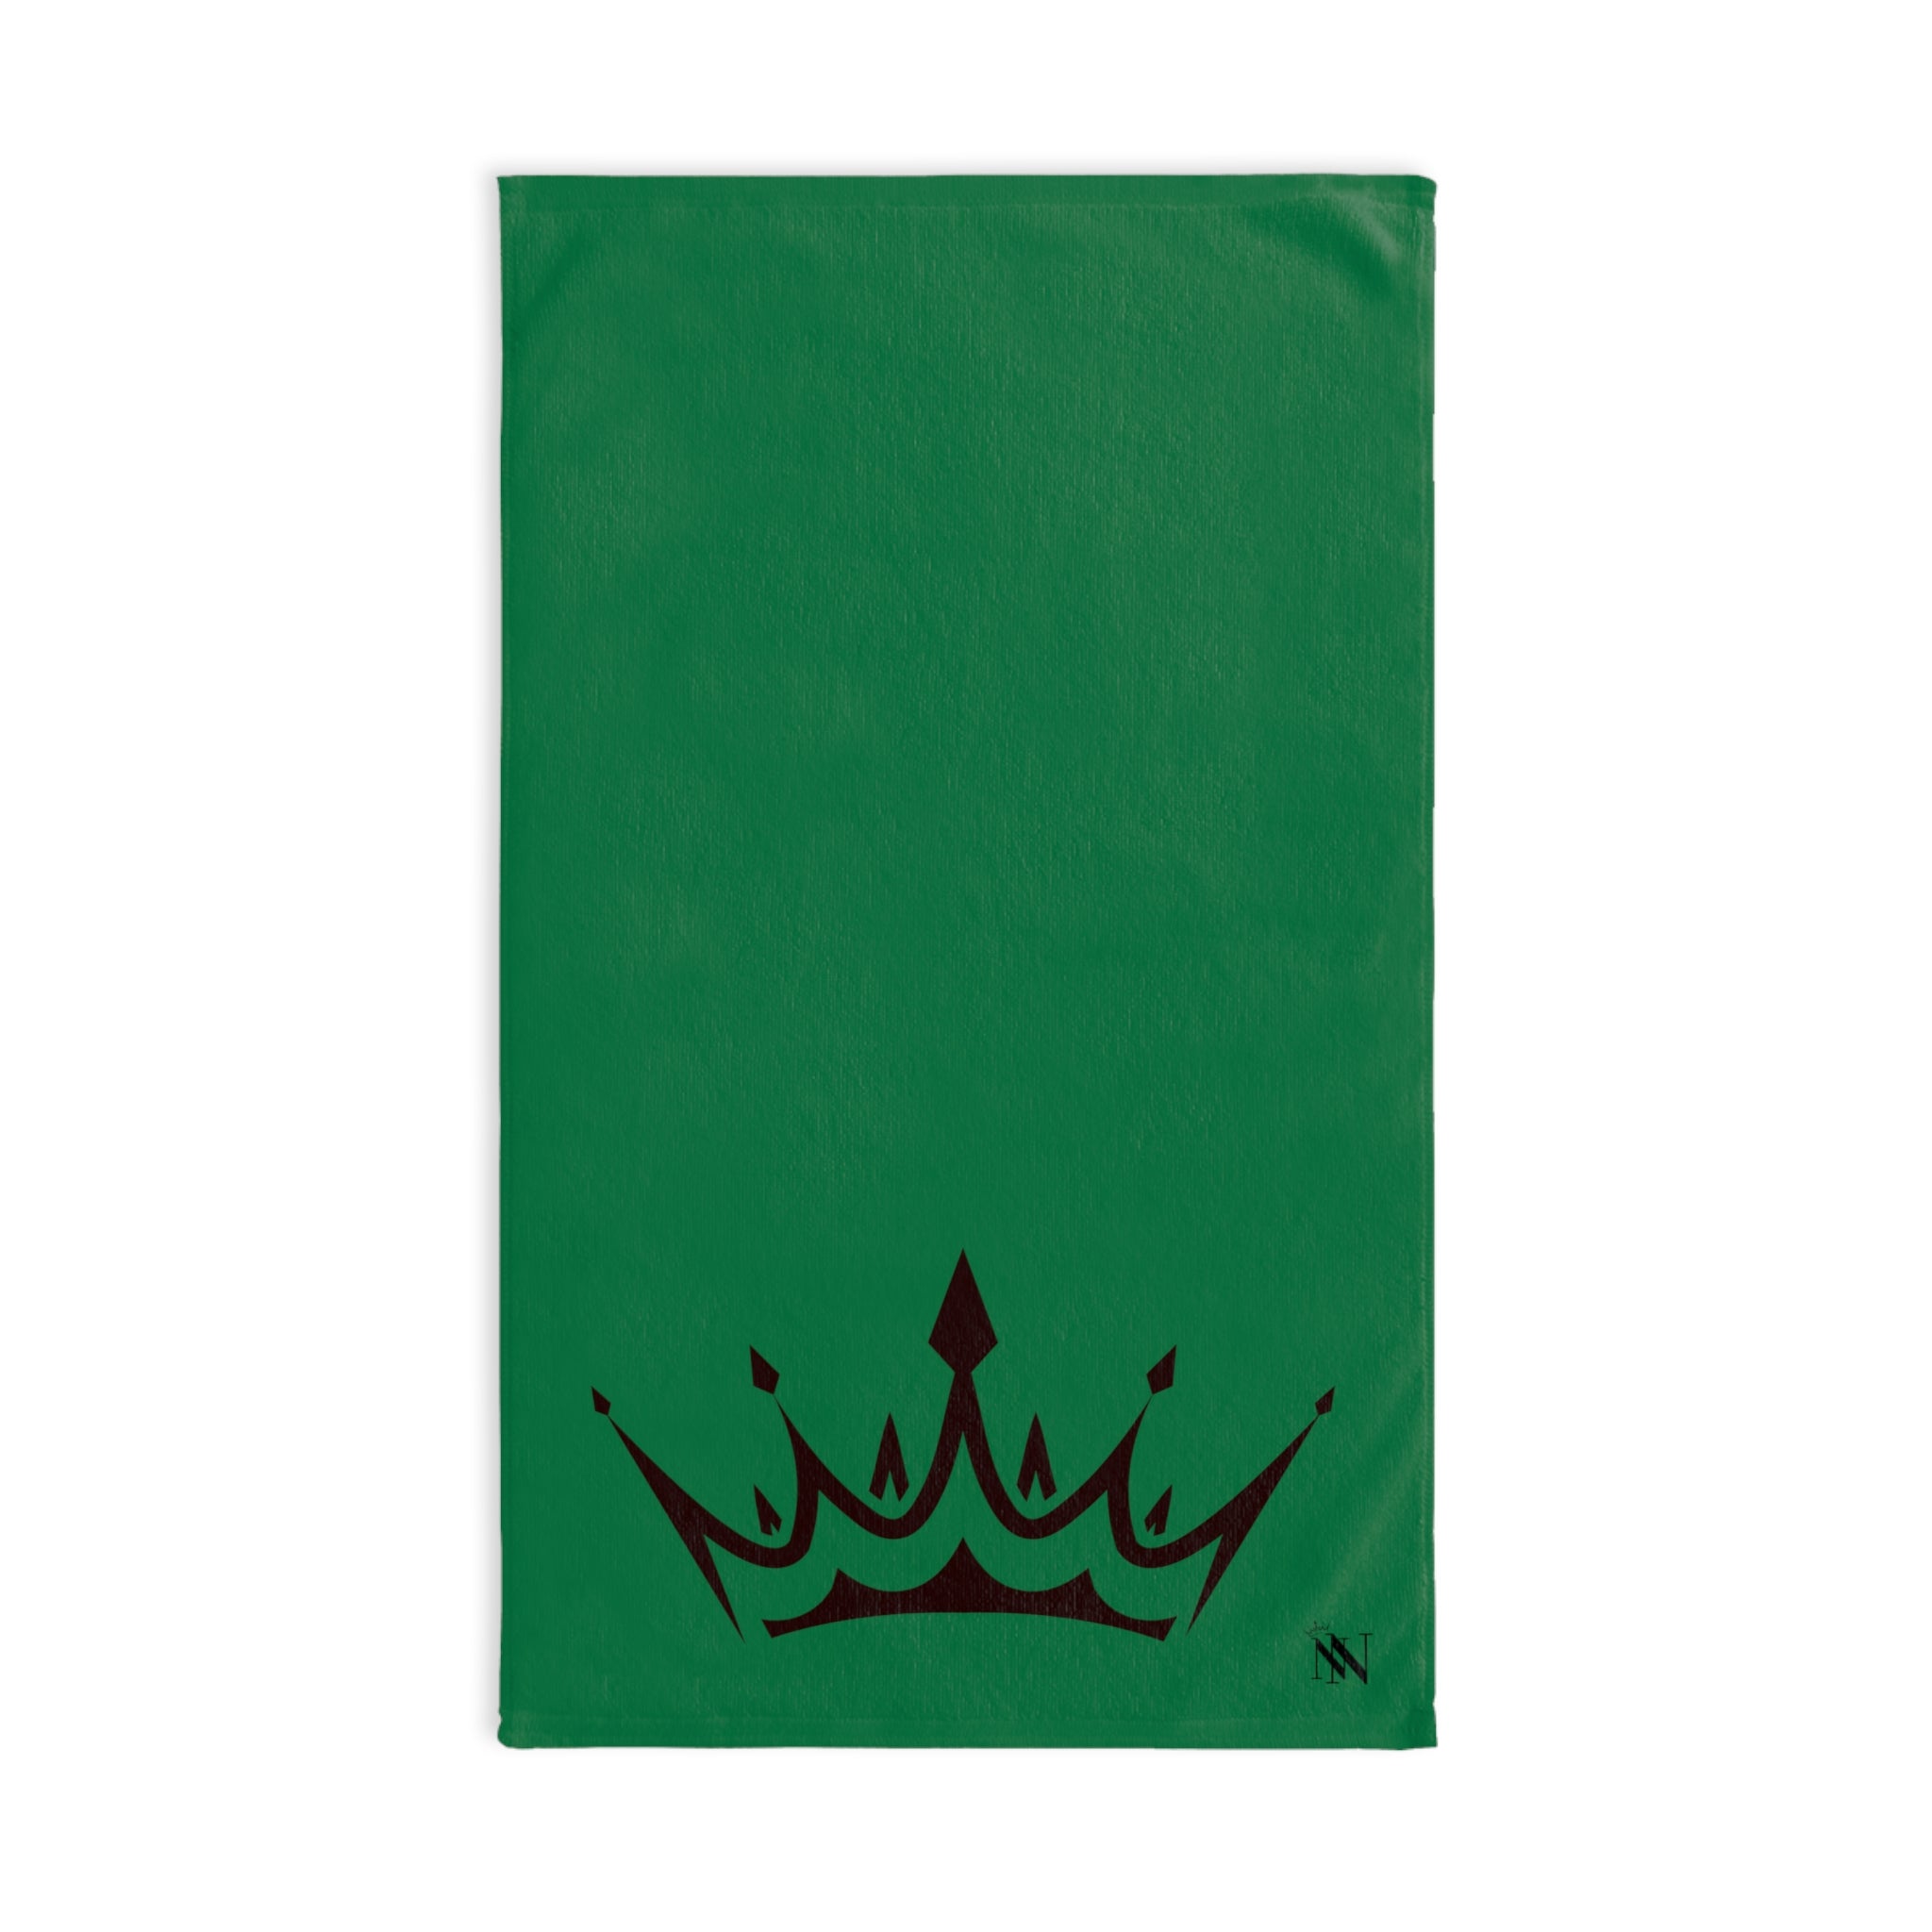 Black Crown Green | Anniversary Wedding, Christmas, Valentines Day, Birthday Gifts for Him, Her, Romantic Gifts for Wife, Girlfriend, Couples Gifts for Boyfriend, Husband NECTAR NAPKINS